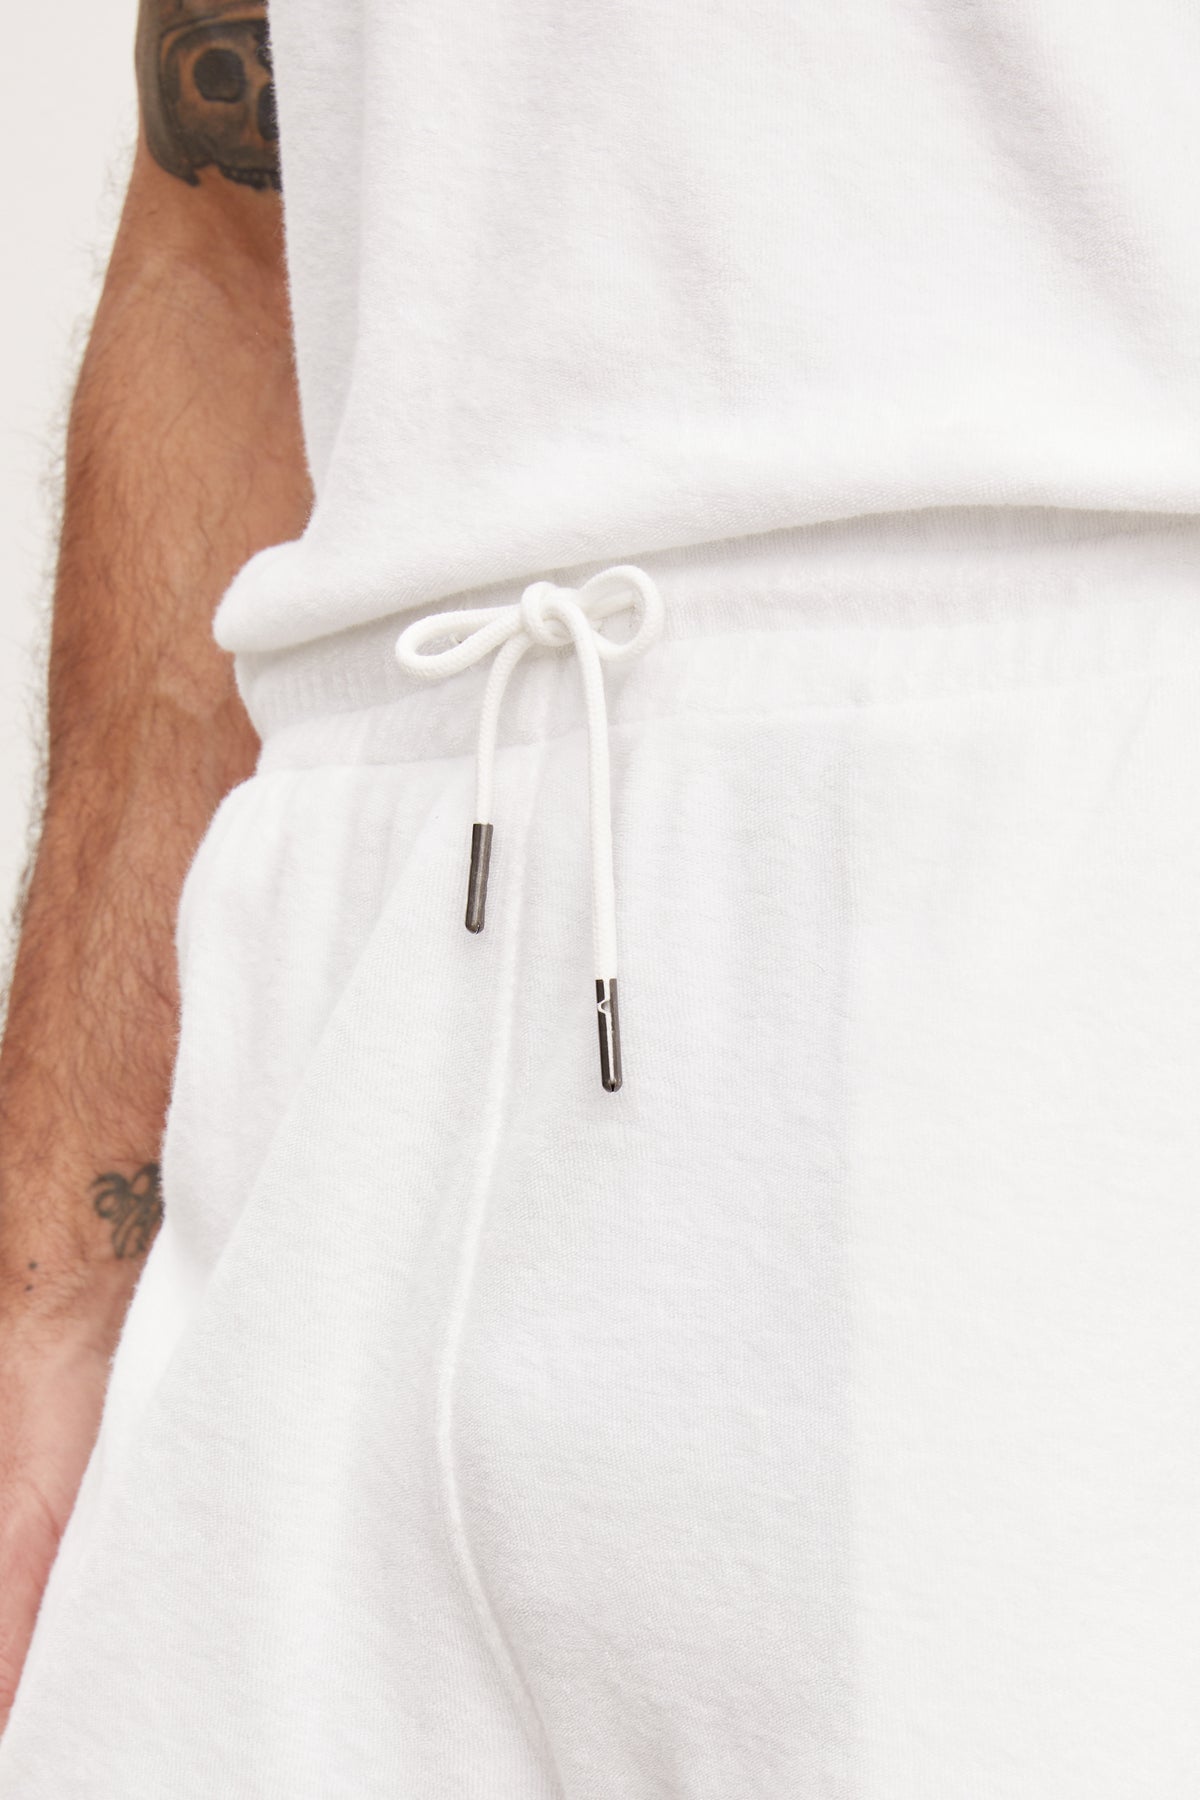 Close-up of a white drawstring with metal aglets on Velvet by Graham & Spencer's SALEM SHORT lounging shorts, against a man's side with a visible arm tattoo.-36943667921089